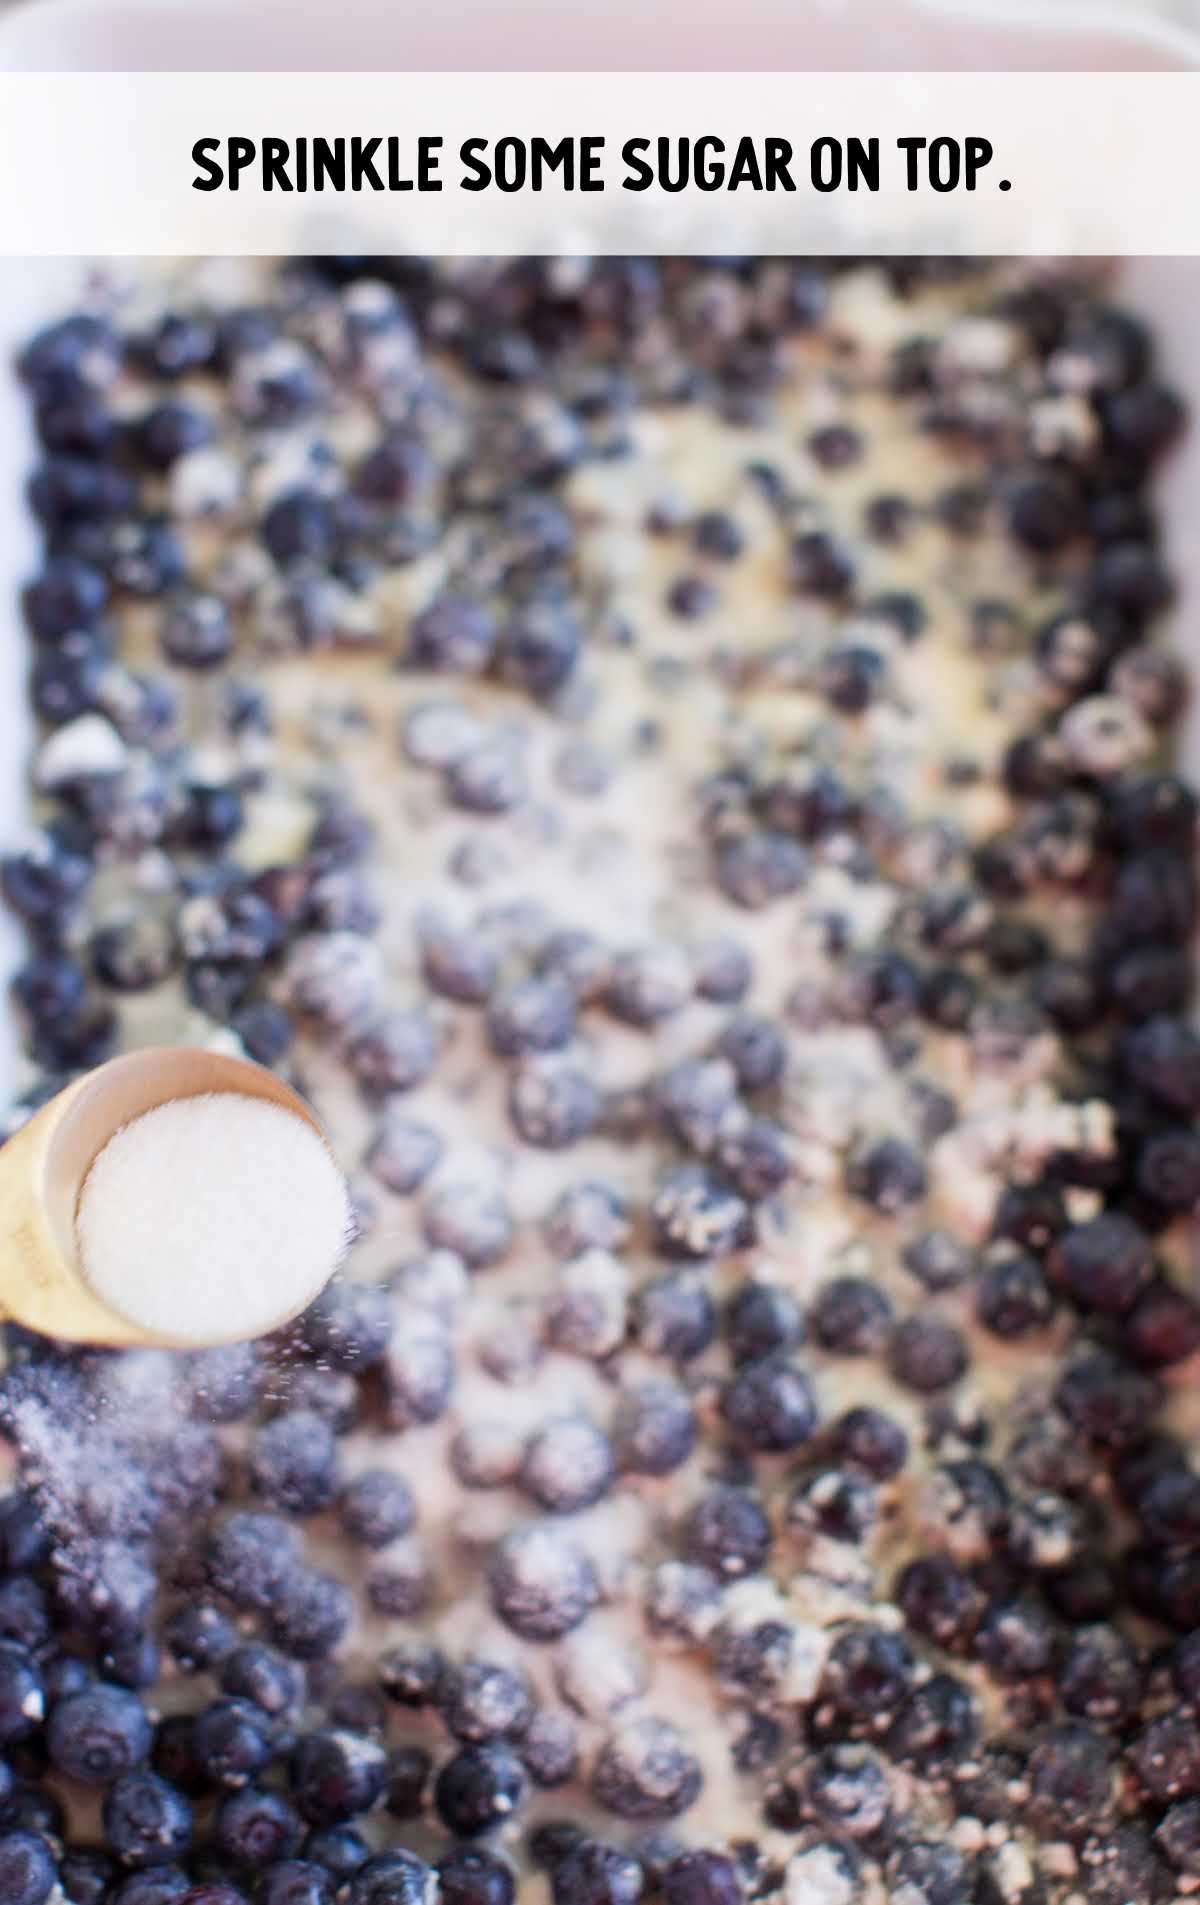 Blueberry Cobbler Recipe process shot of sugar being poured on top the blueberry cobbler